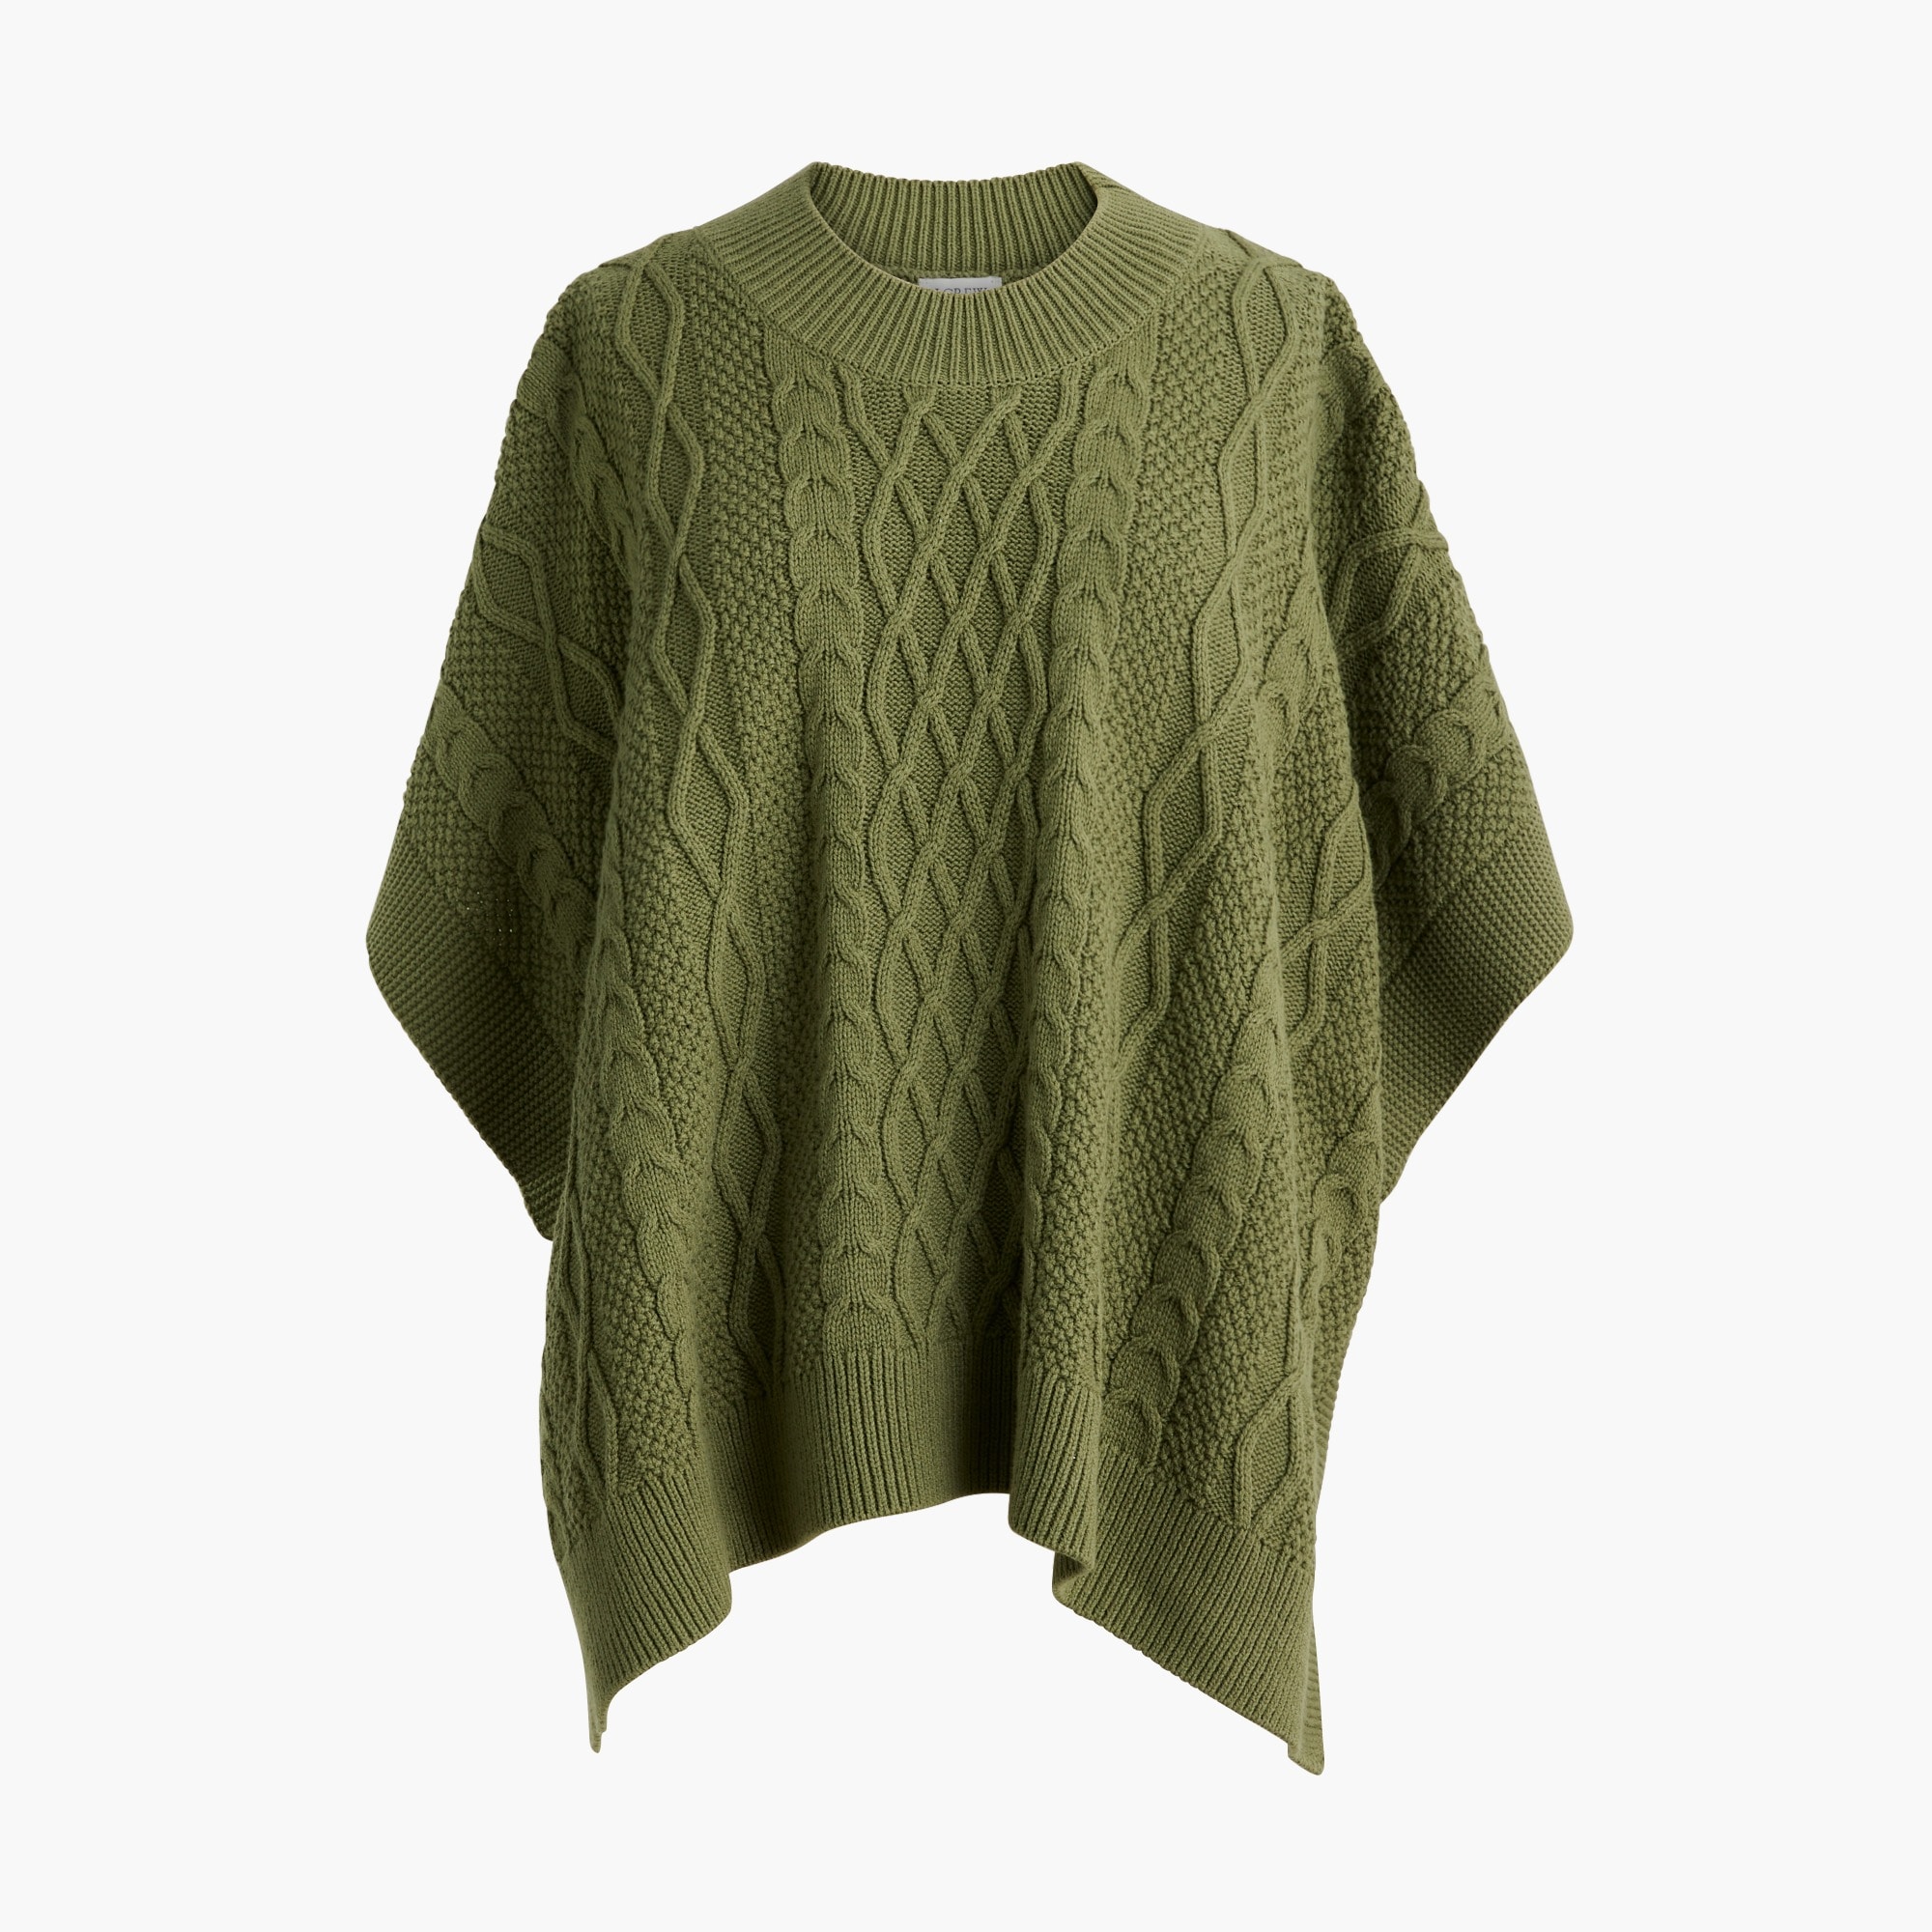  Fisherman cable-knit poncho